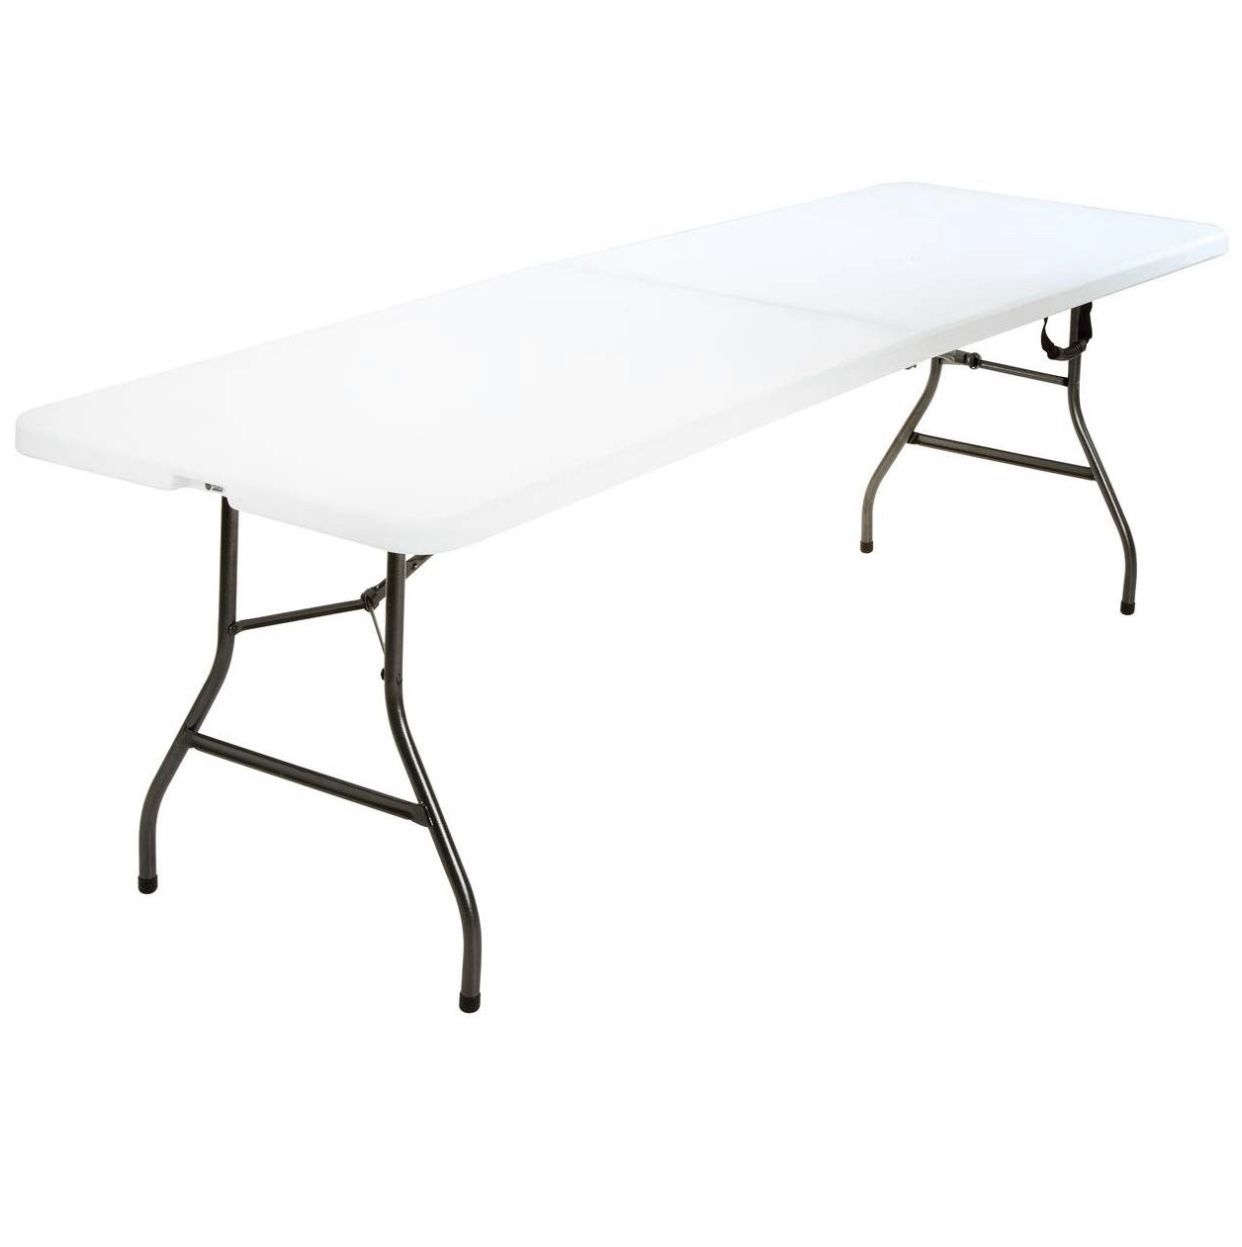 Cosco 8 ft foldable table